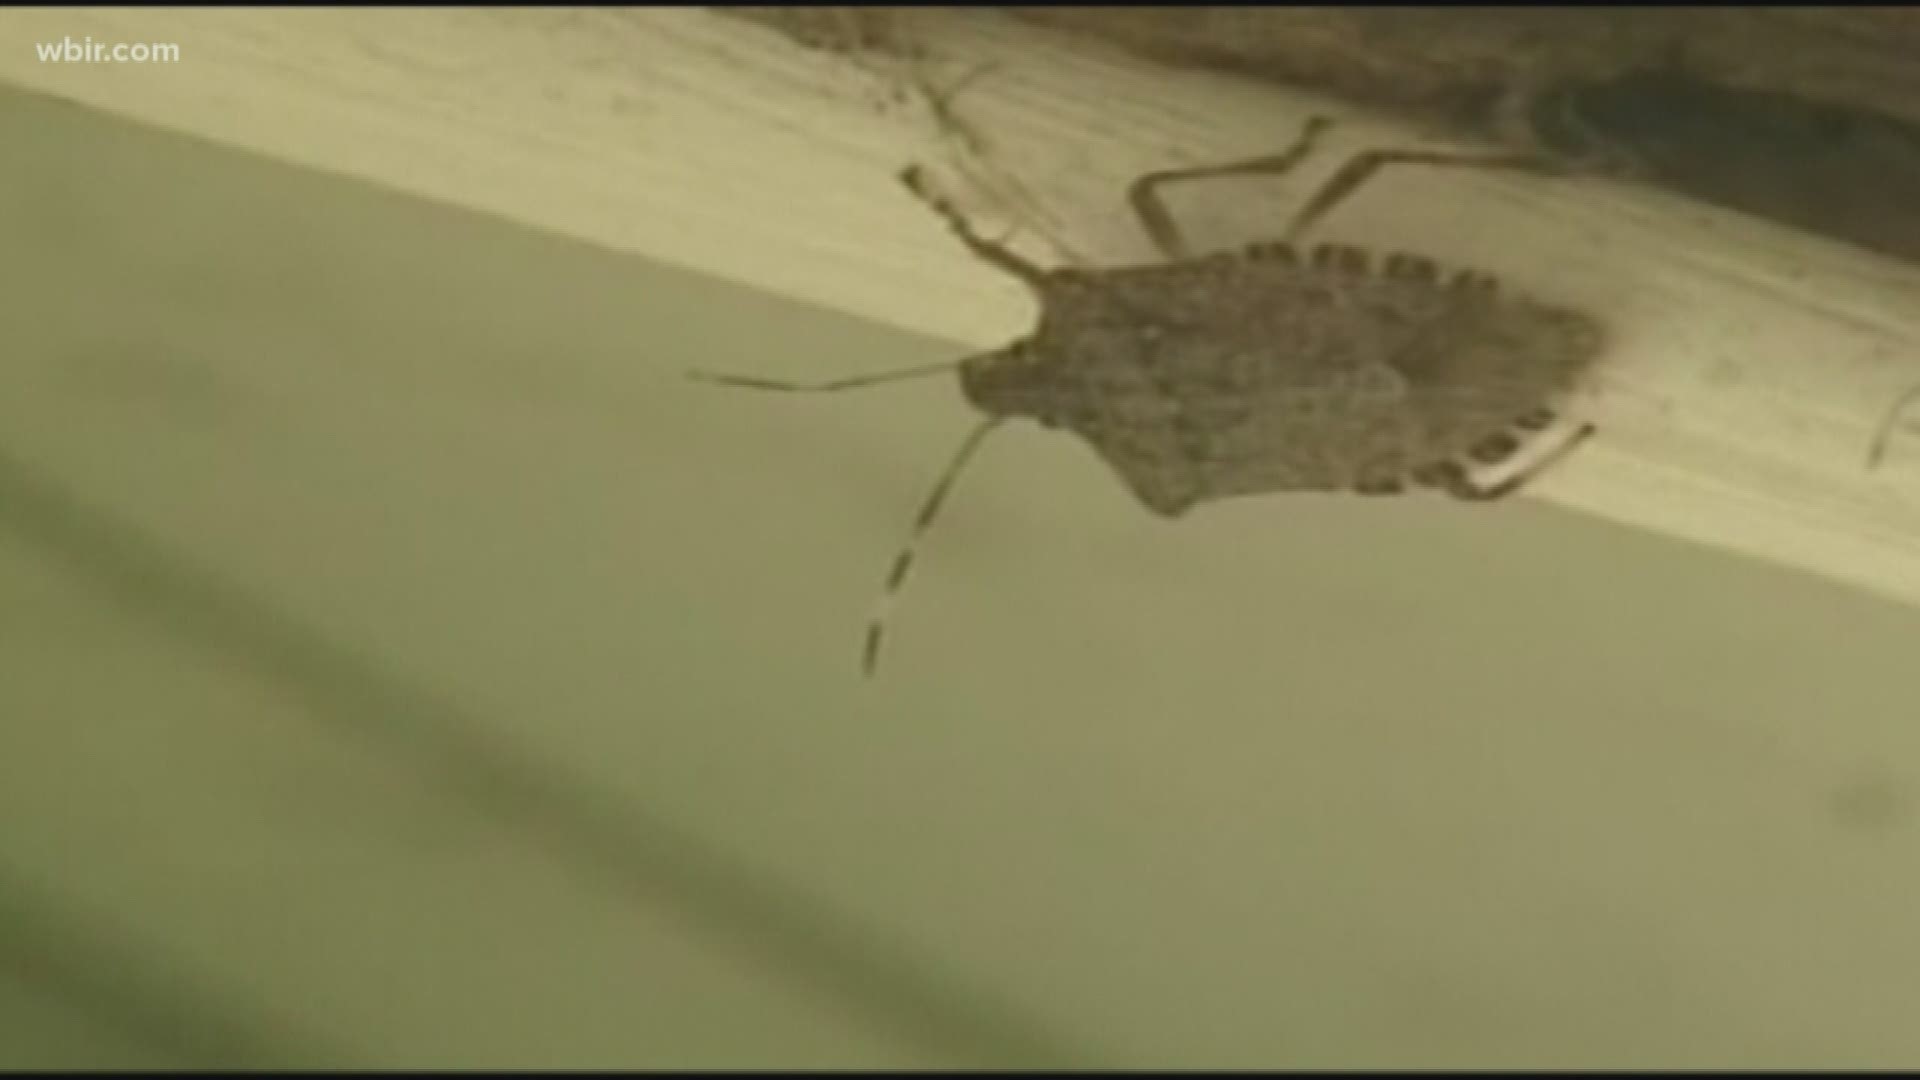 They Re Baaaack Stink Bugs Are Spending Fall Creeping Into